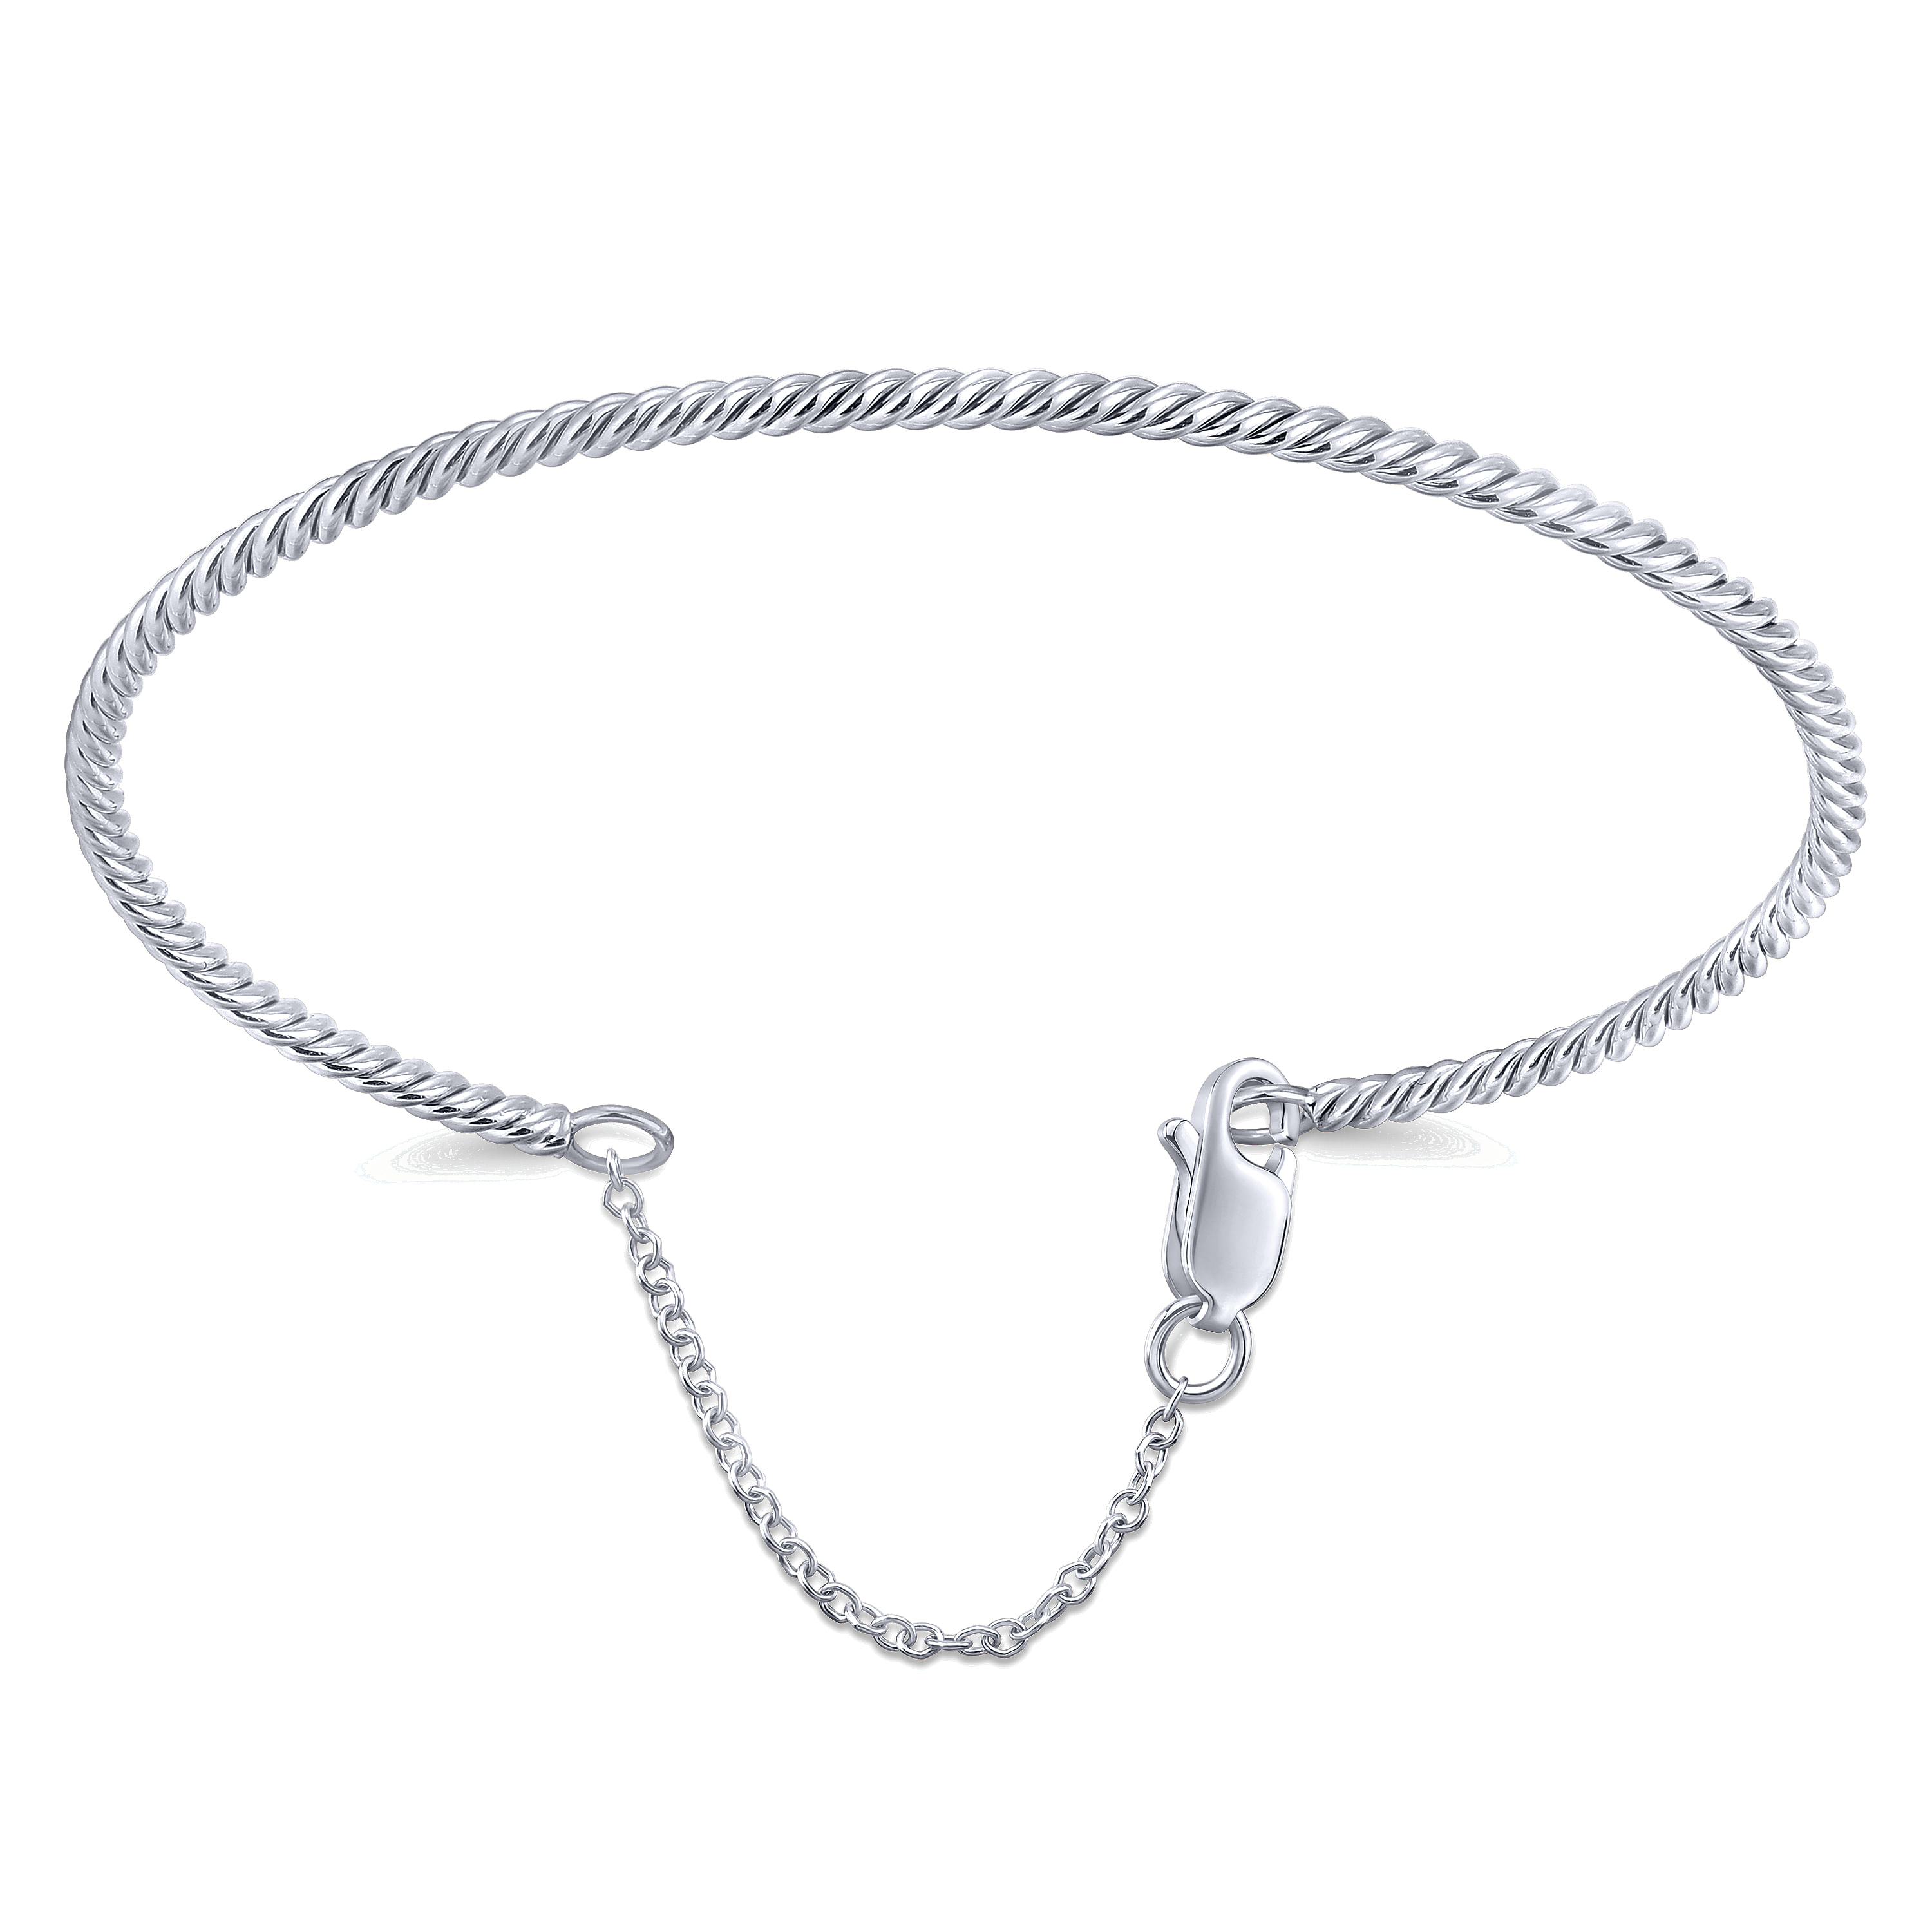 14K White Gold Twisted Bangle with Chain Drop